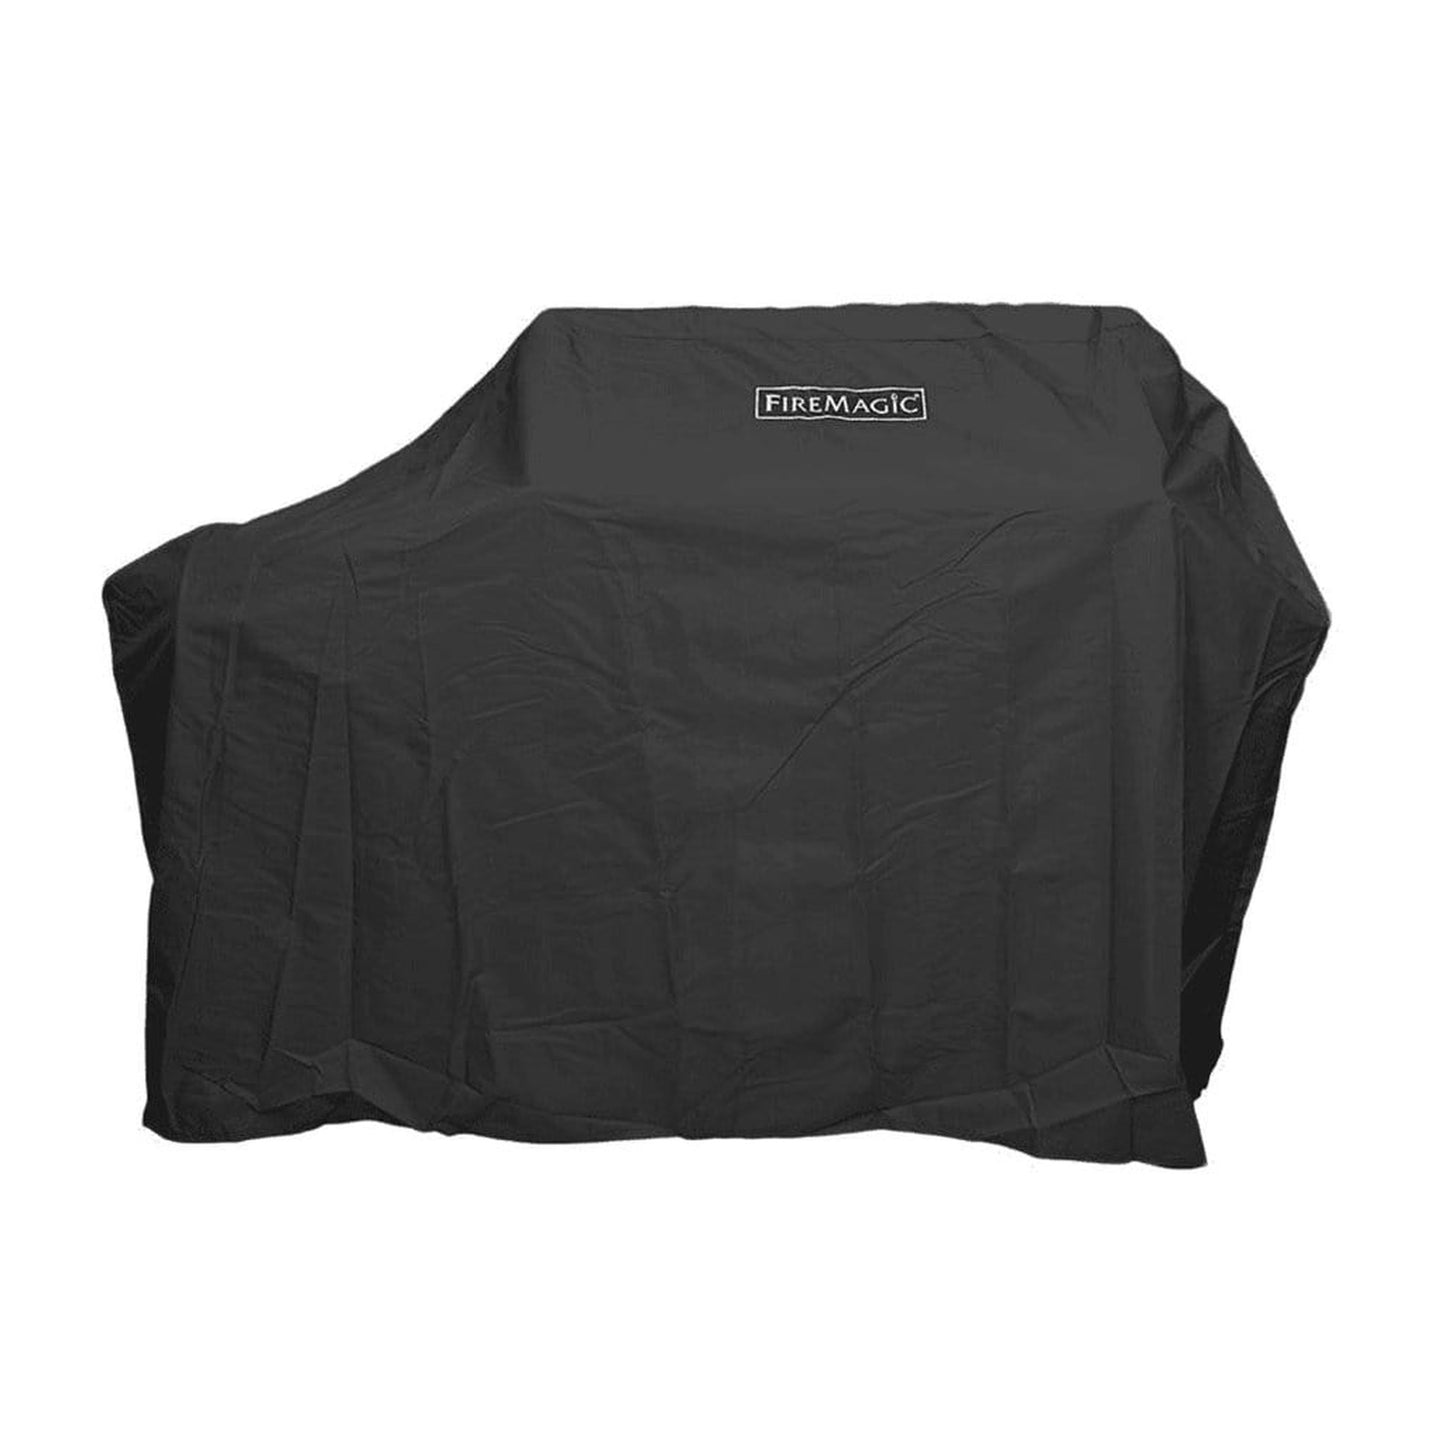 Fire Magic 5125-20F Black Vinyl Cover for Aurora A430s & Choice C430s Gas Grills/ Legacy CCH Charcoal Freestanding Grills